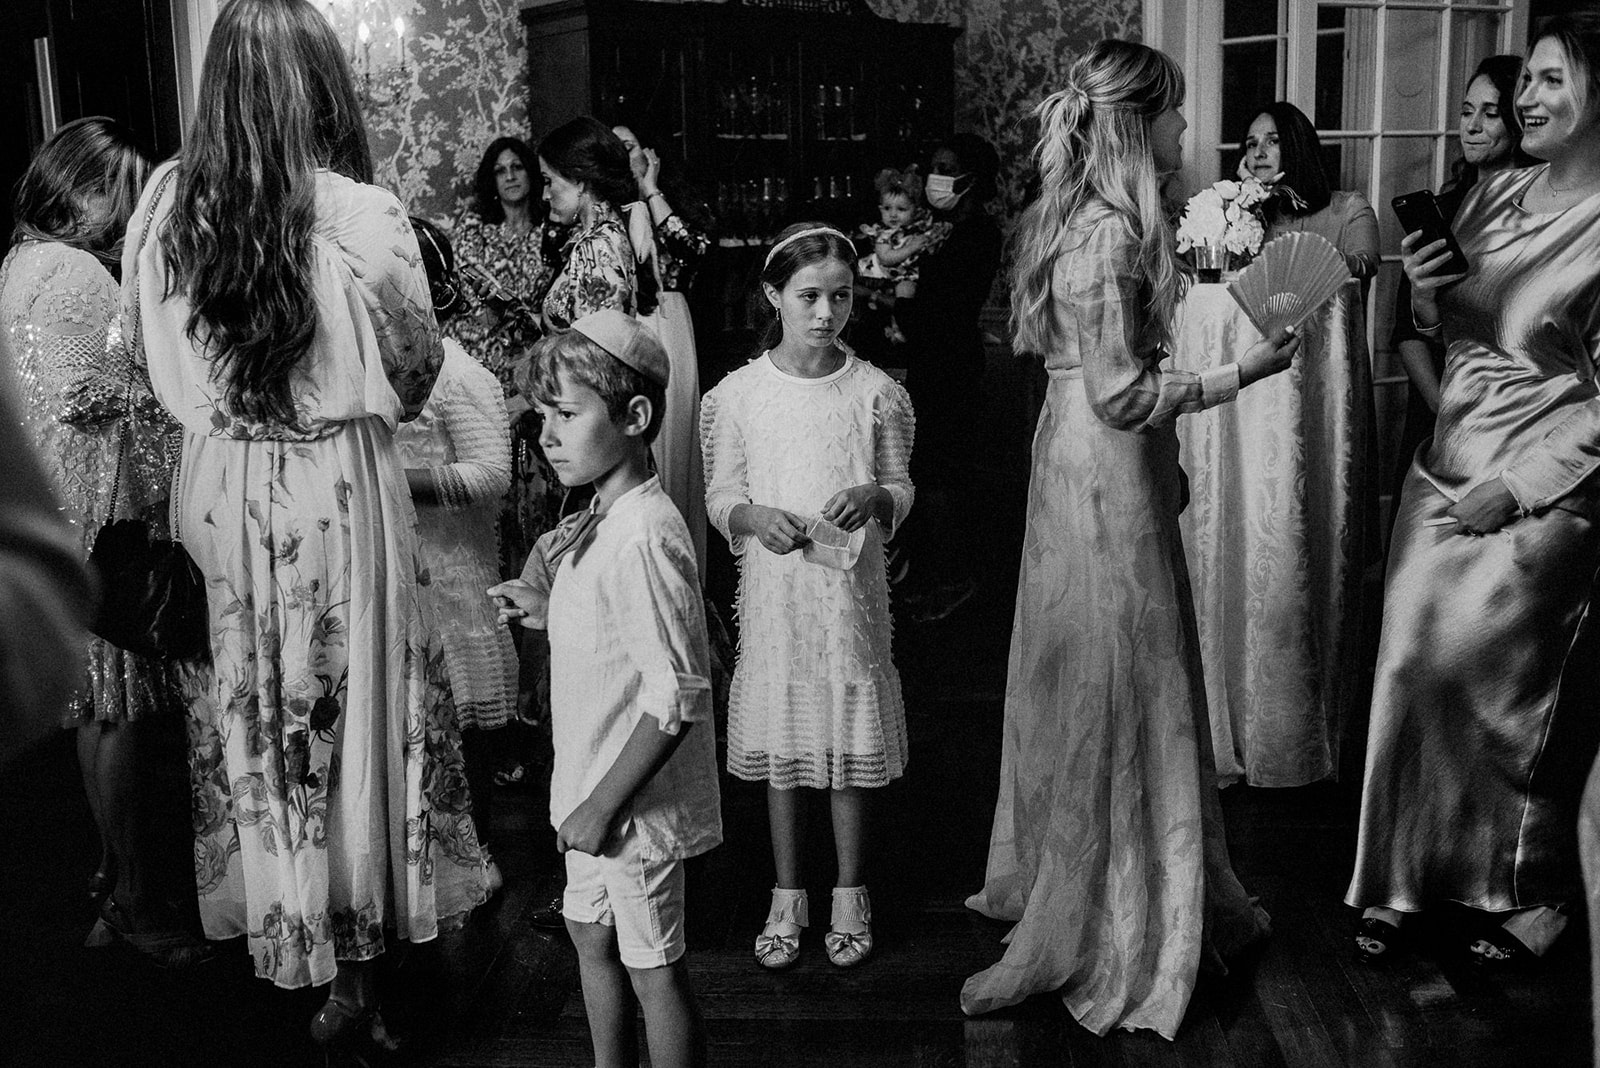 black and white documentary style image of children waiting in crowd of wedding guests